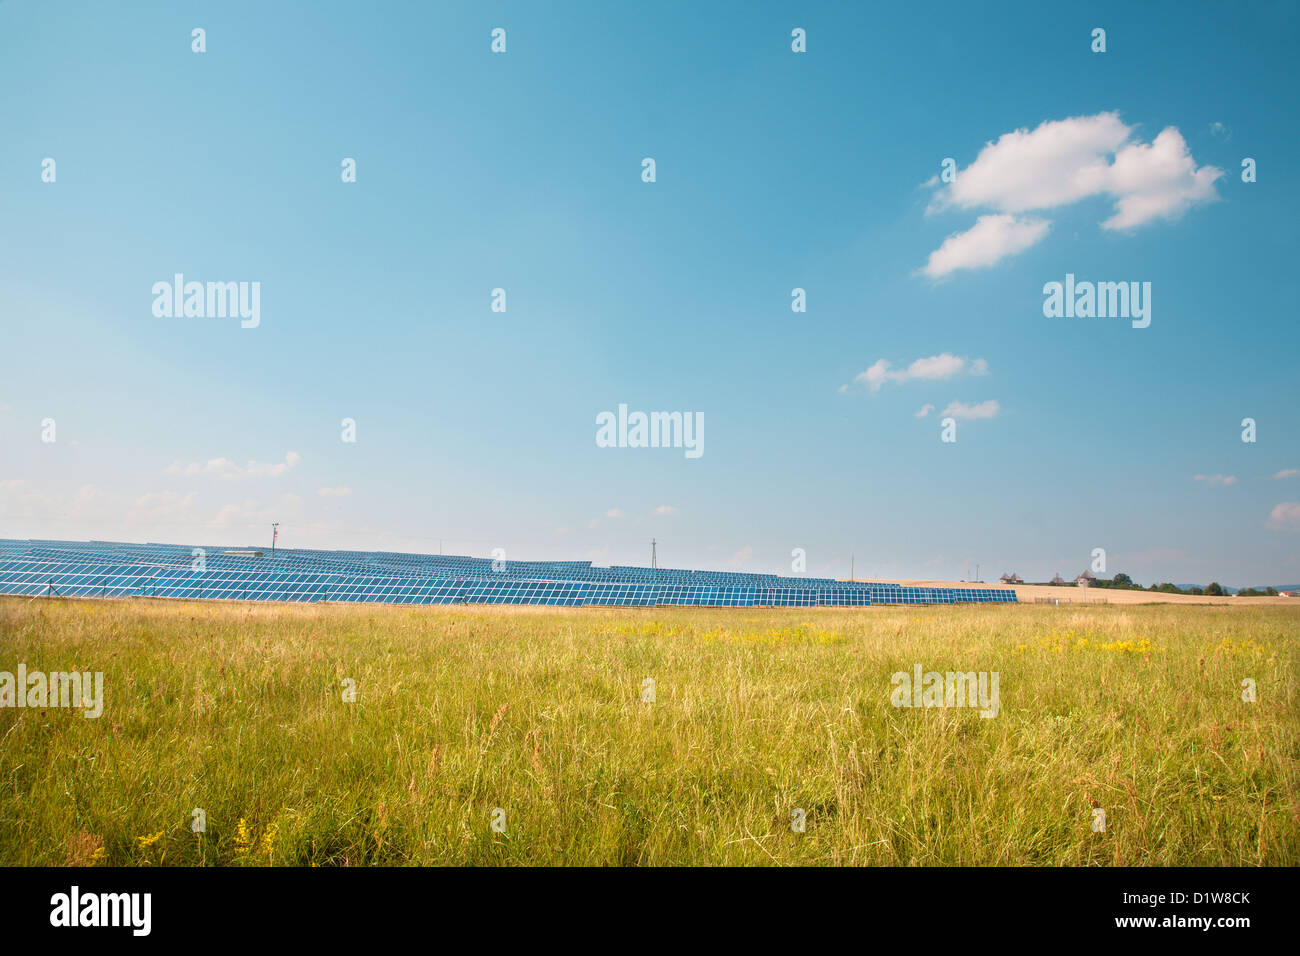 solar panels and the sky - landscape Stock Photo